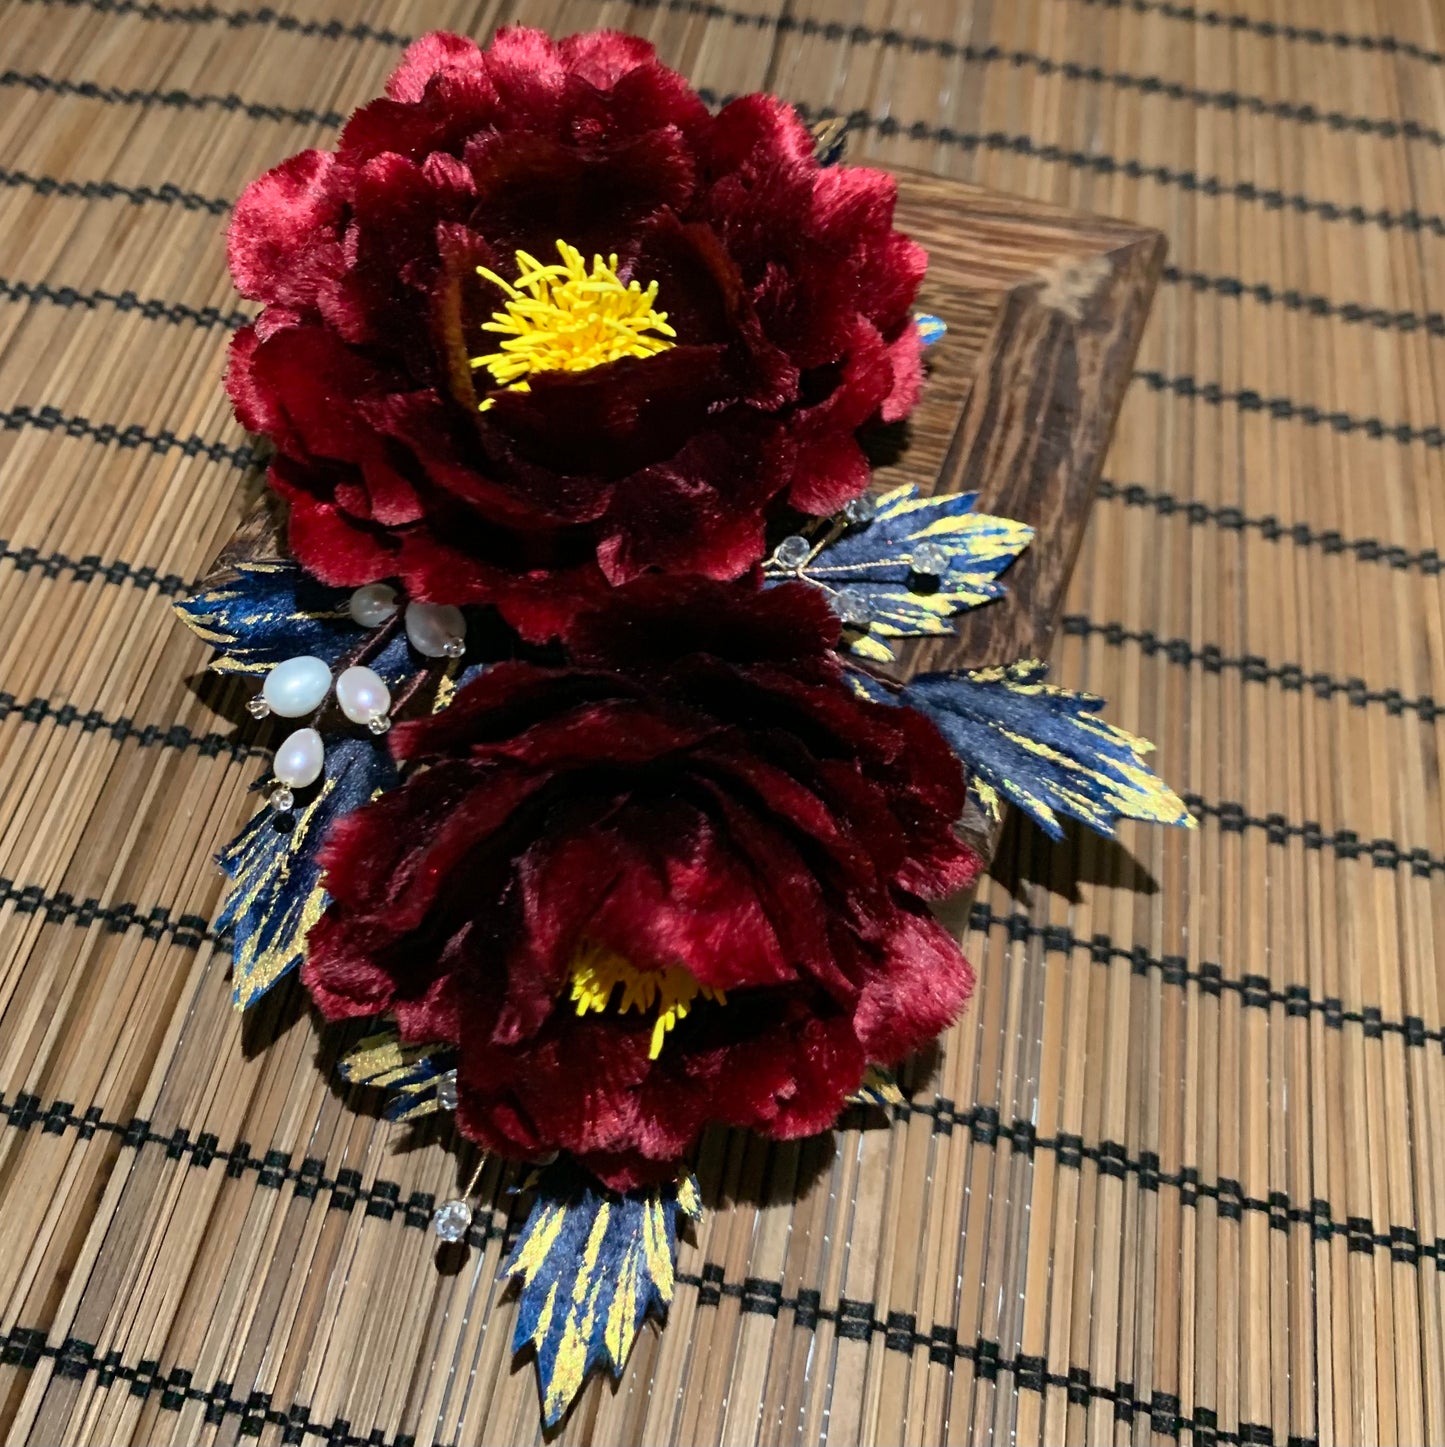 Wine Red Wrist corsages for your wedding or  Graduation Ball